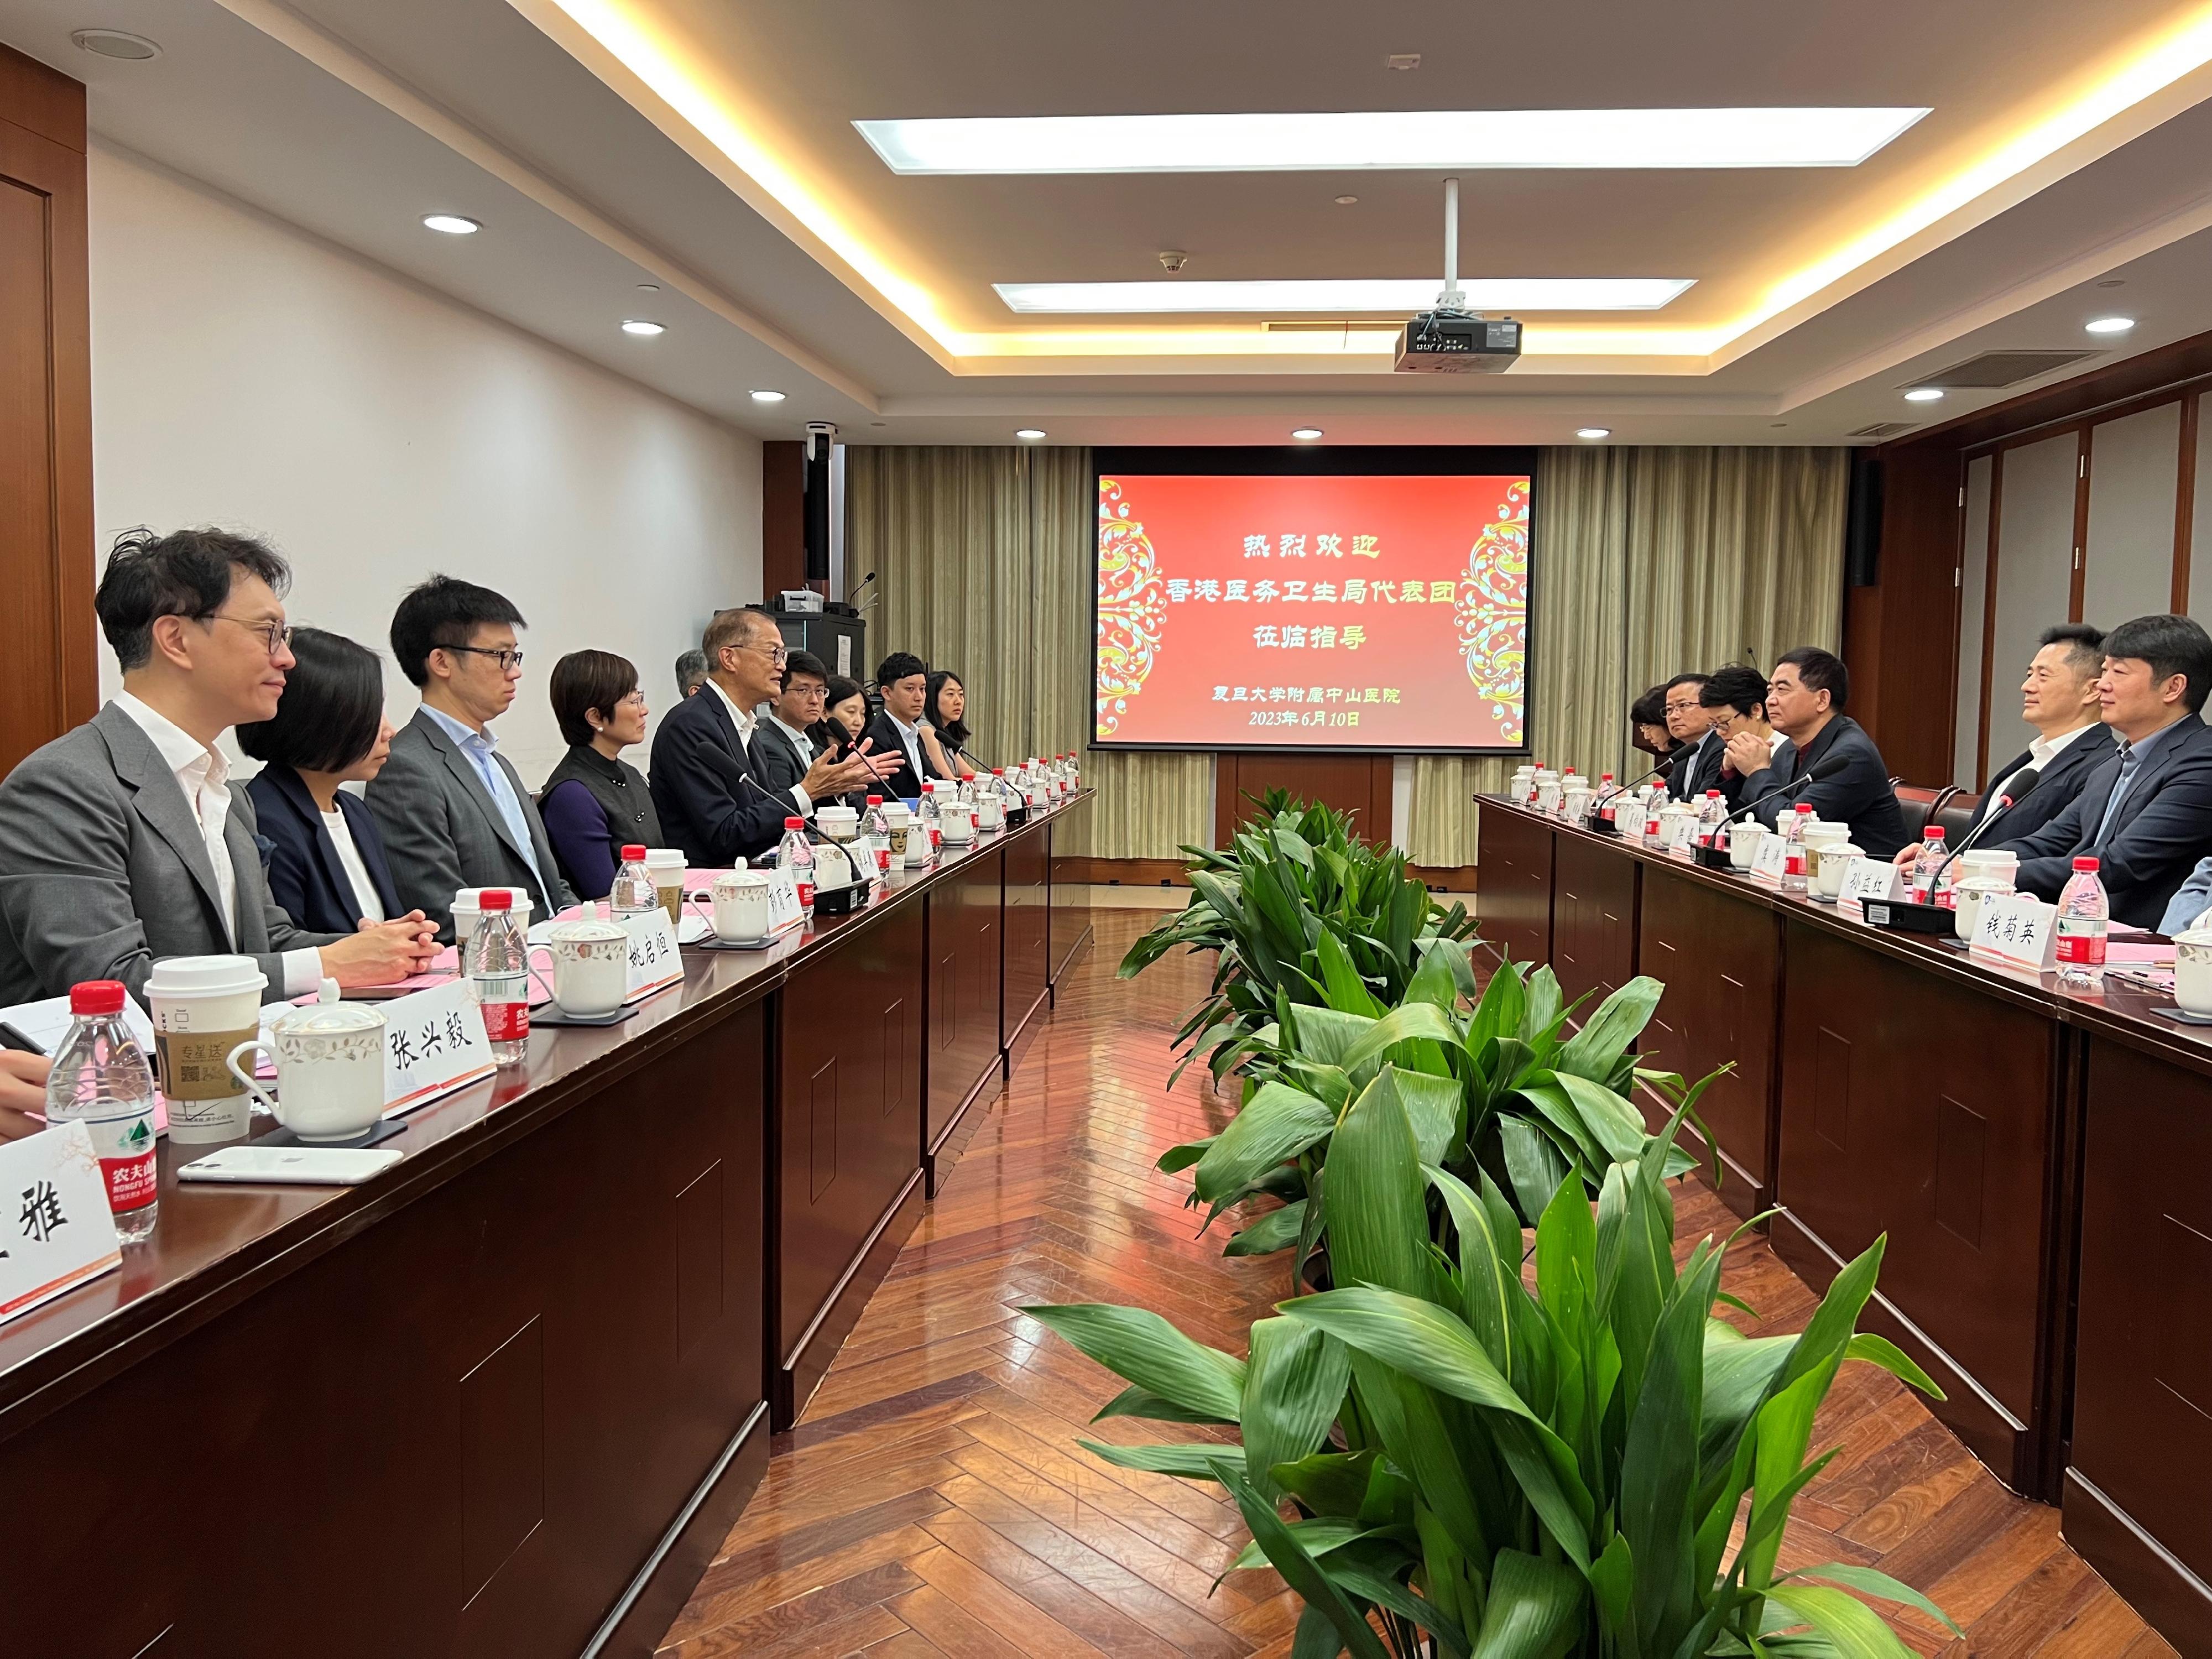 During his visit to the Zhongshan Hospital affiliated to Fudan University today (June 10), the Secretary for Health, Professor Lo Chung-mau (fifth left), met with its President, Dr Fan Jia (second right), and its Director of Cardiology Department, Dr Ge Junbo (third right), to get a grasp of the hospital’s high quality work. Deputy Director of the Shanghai Municipal Health Commission Mr Yu Tao (first right) also attended.